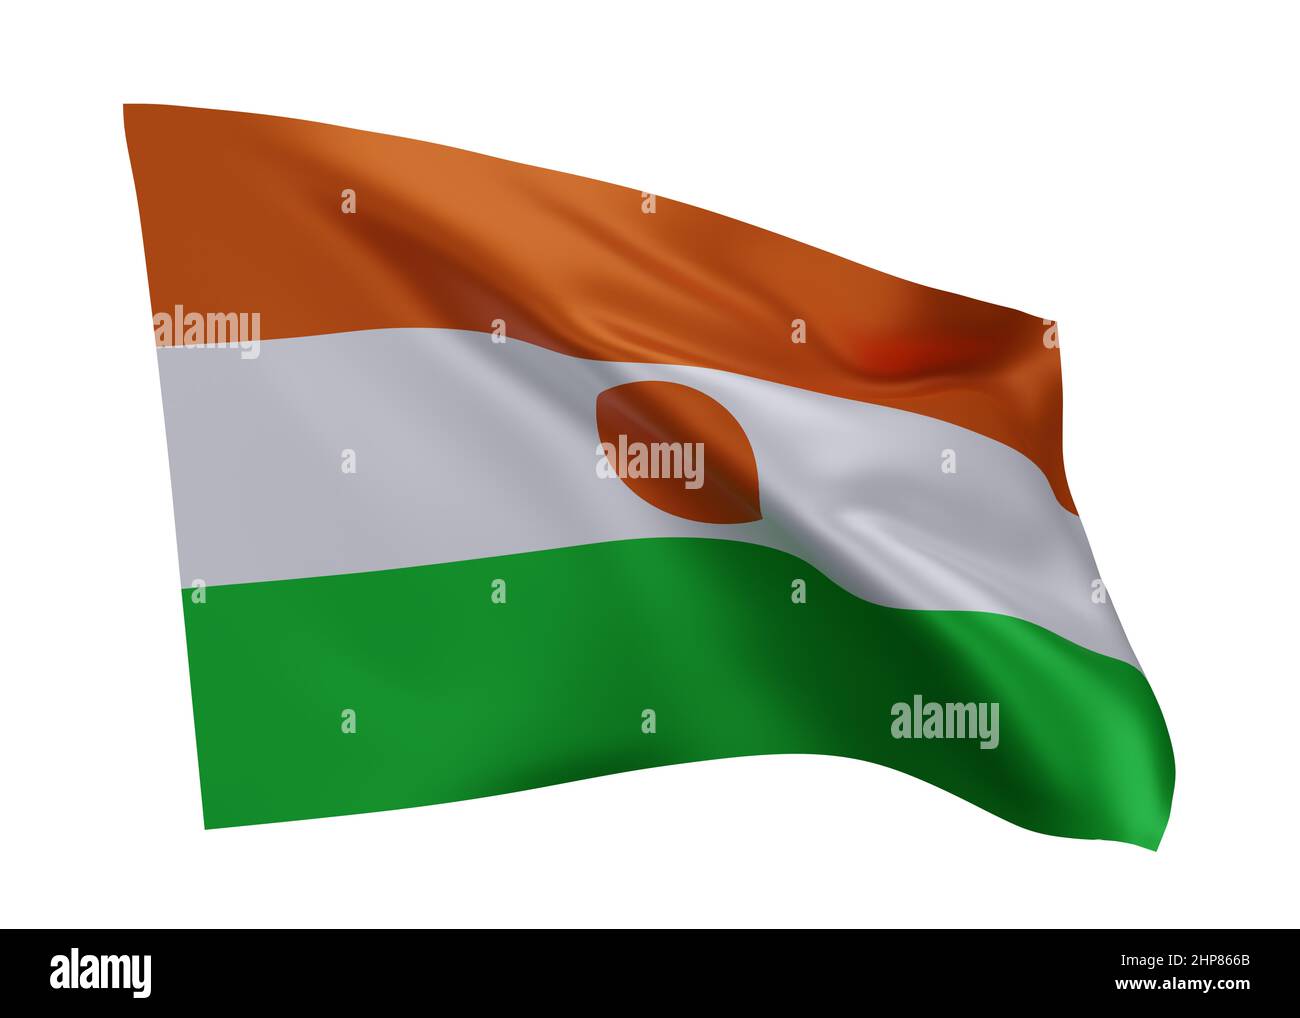 3d illustration flag of Niger. Nigerian high resolution flag isolated against white background. 3d rendering Stock Photo